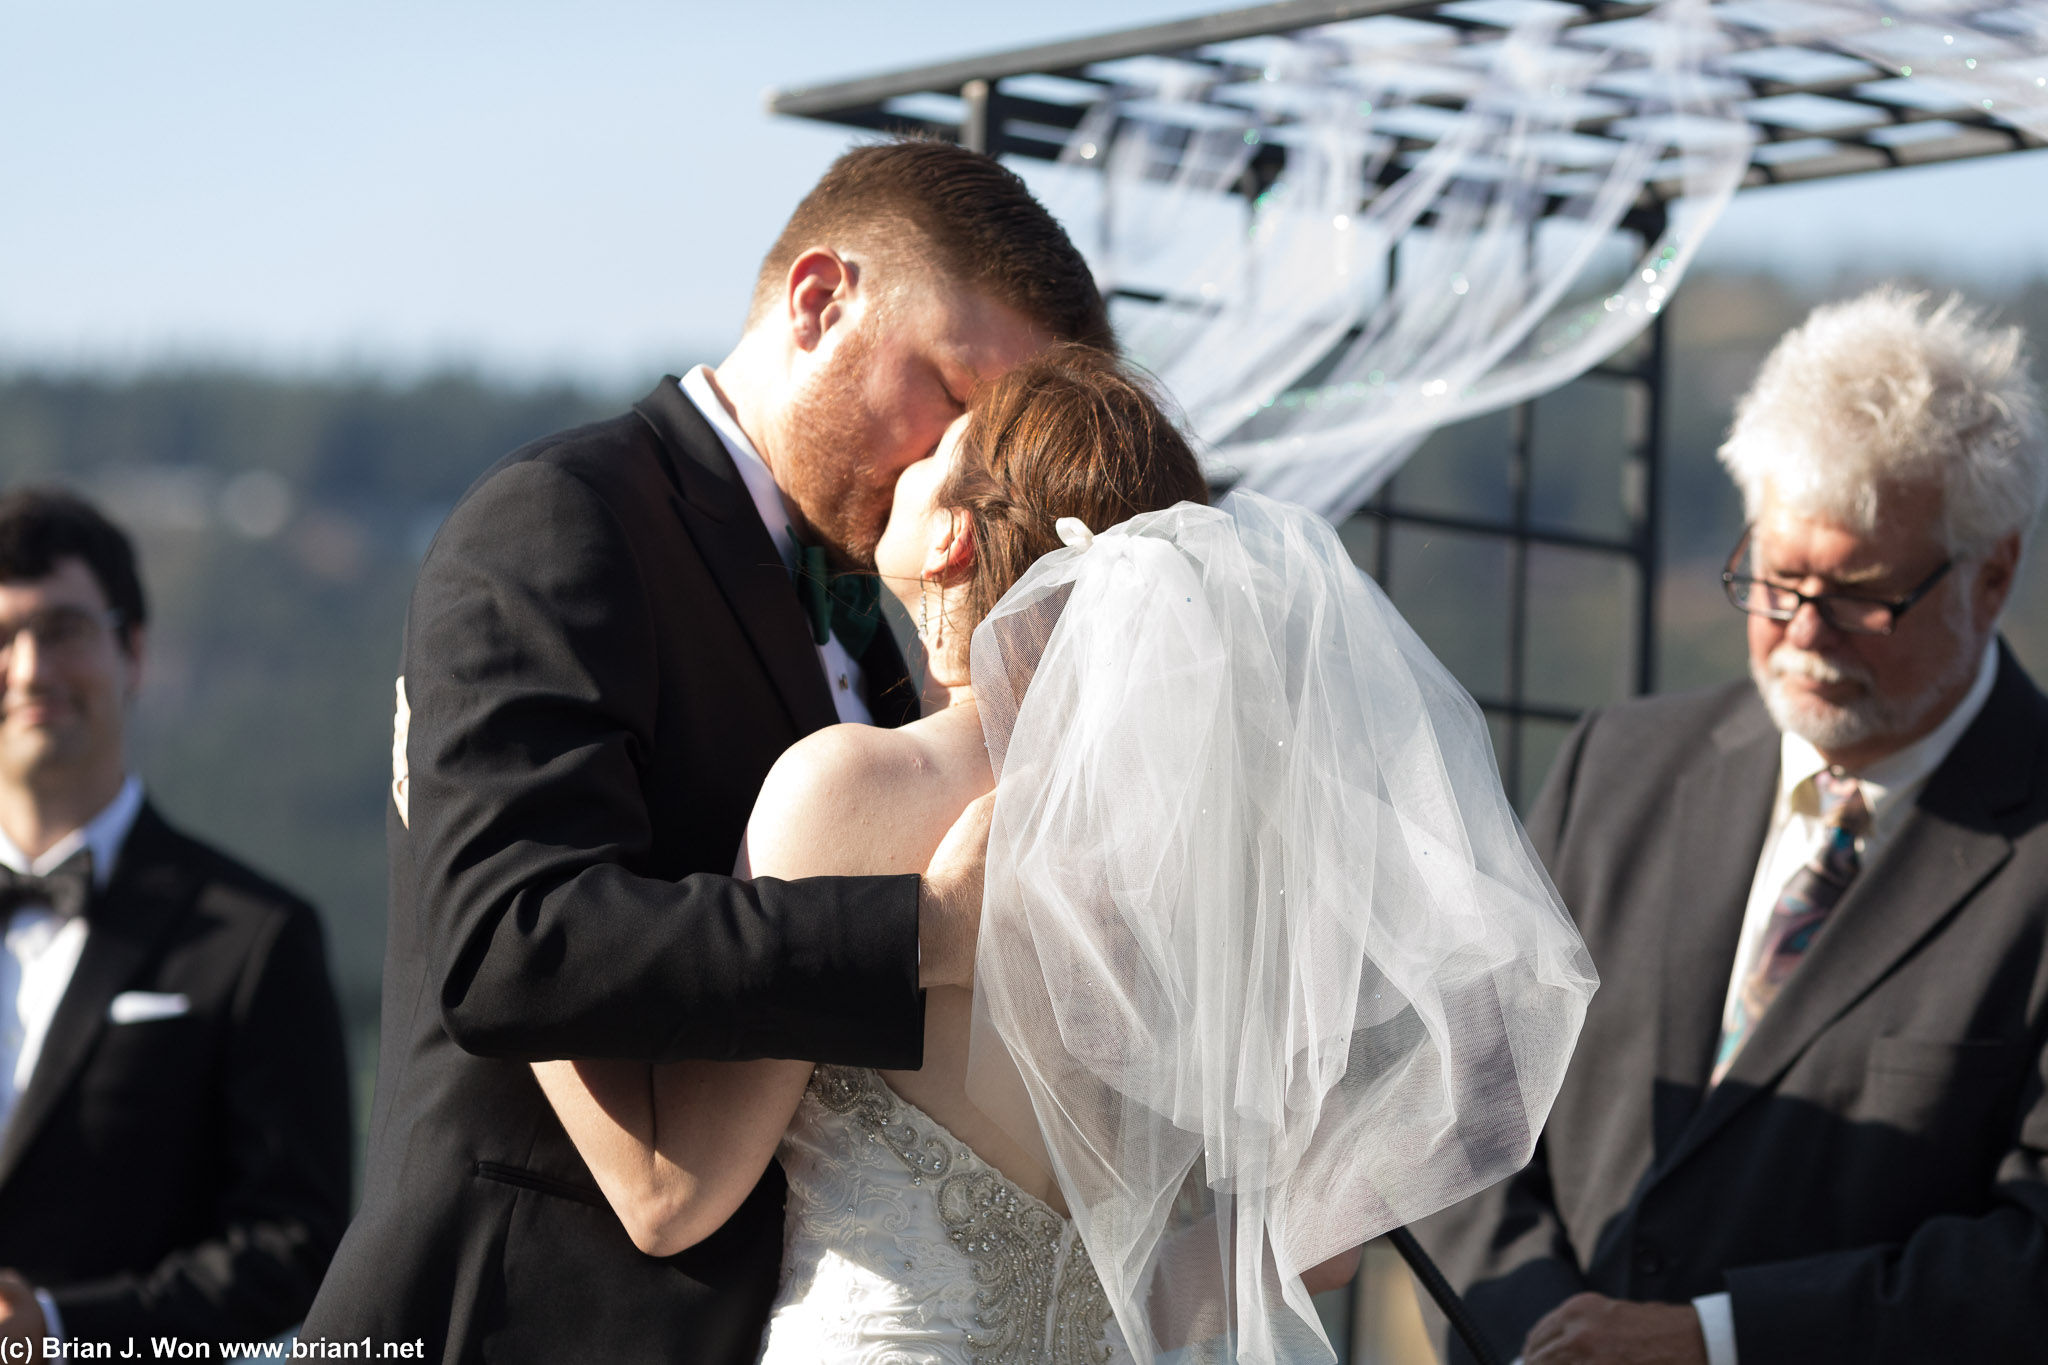 First kiss as bride and groom.